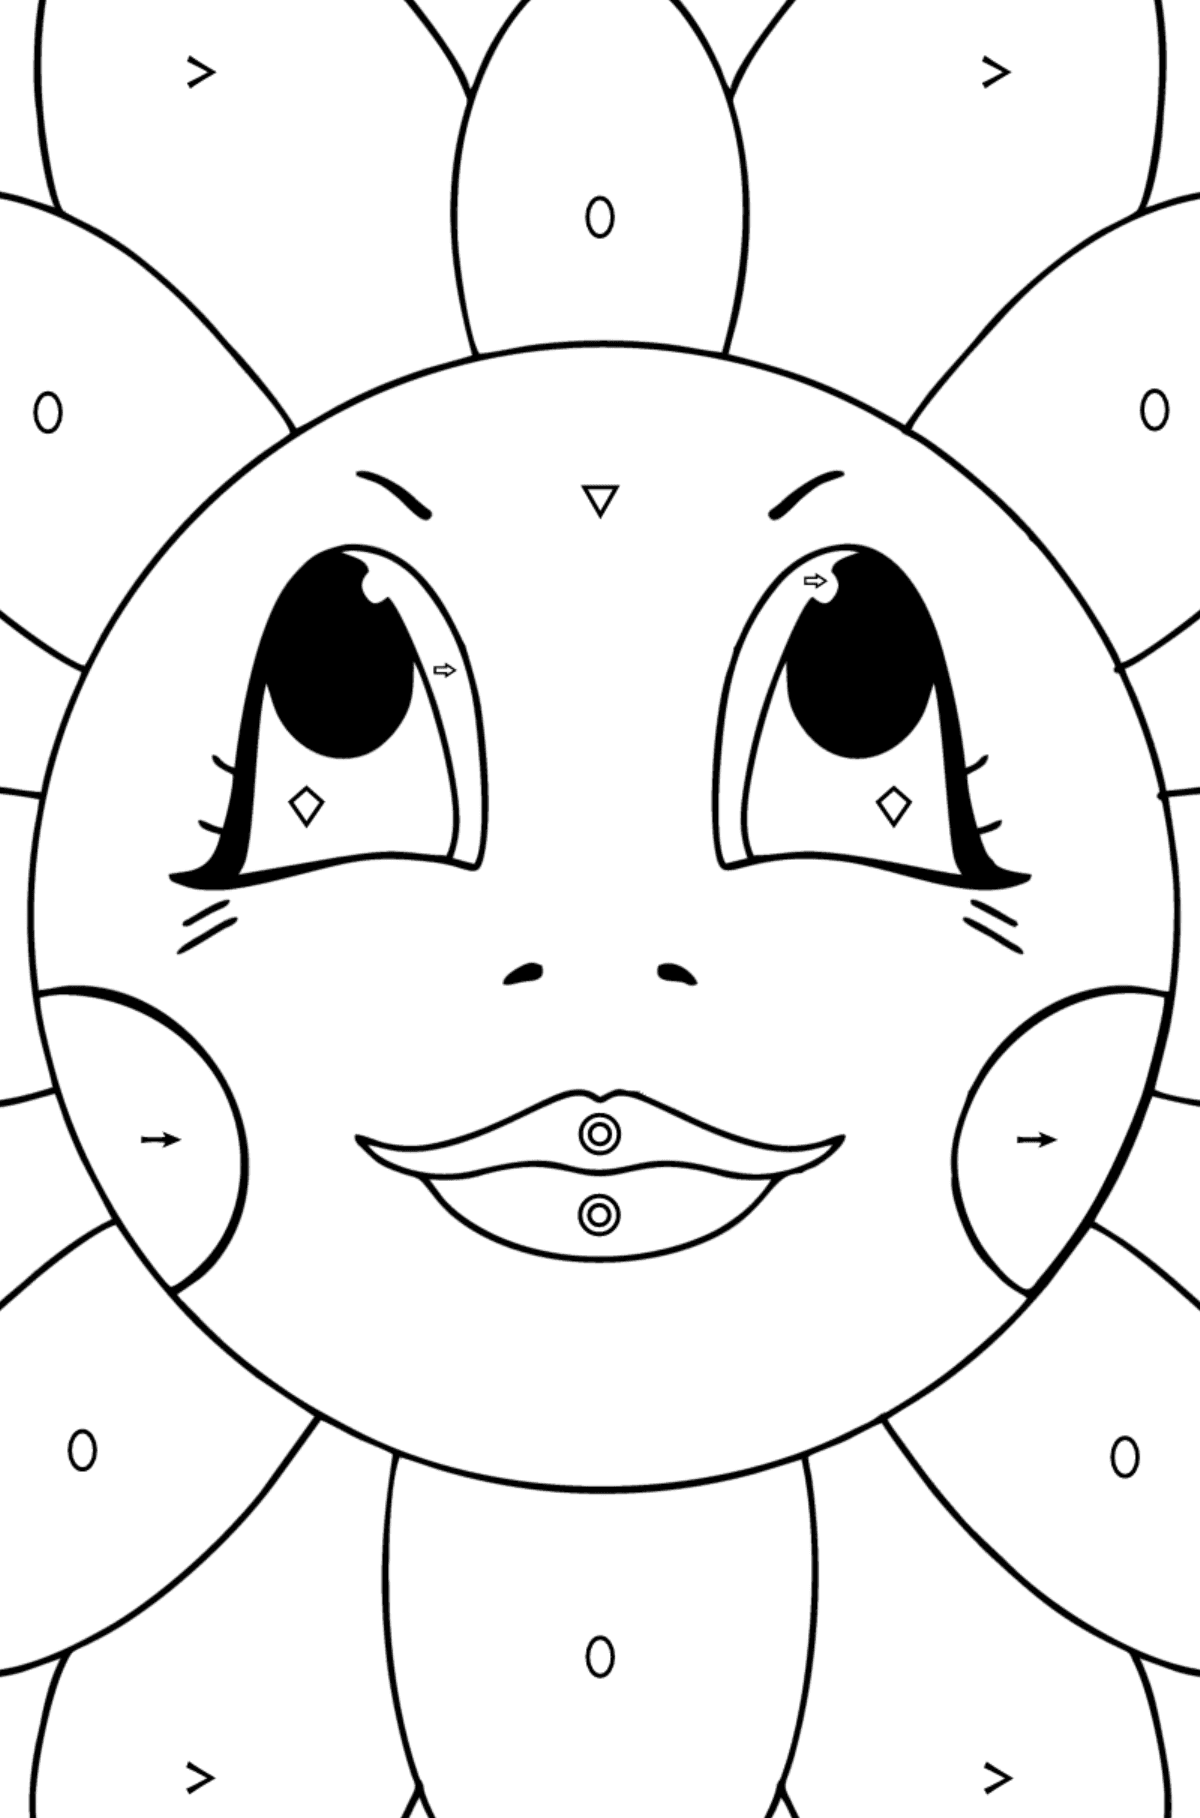 Chamomile with eyes coloring page - Coloring by Symbols and Geometric Shapes for Kids